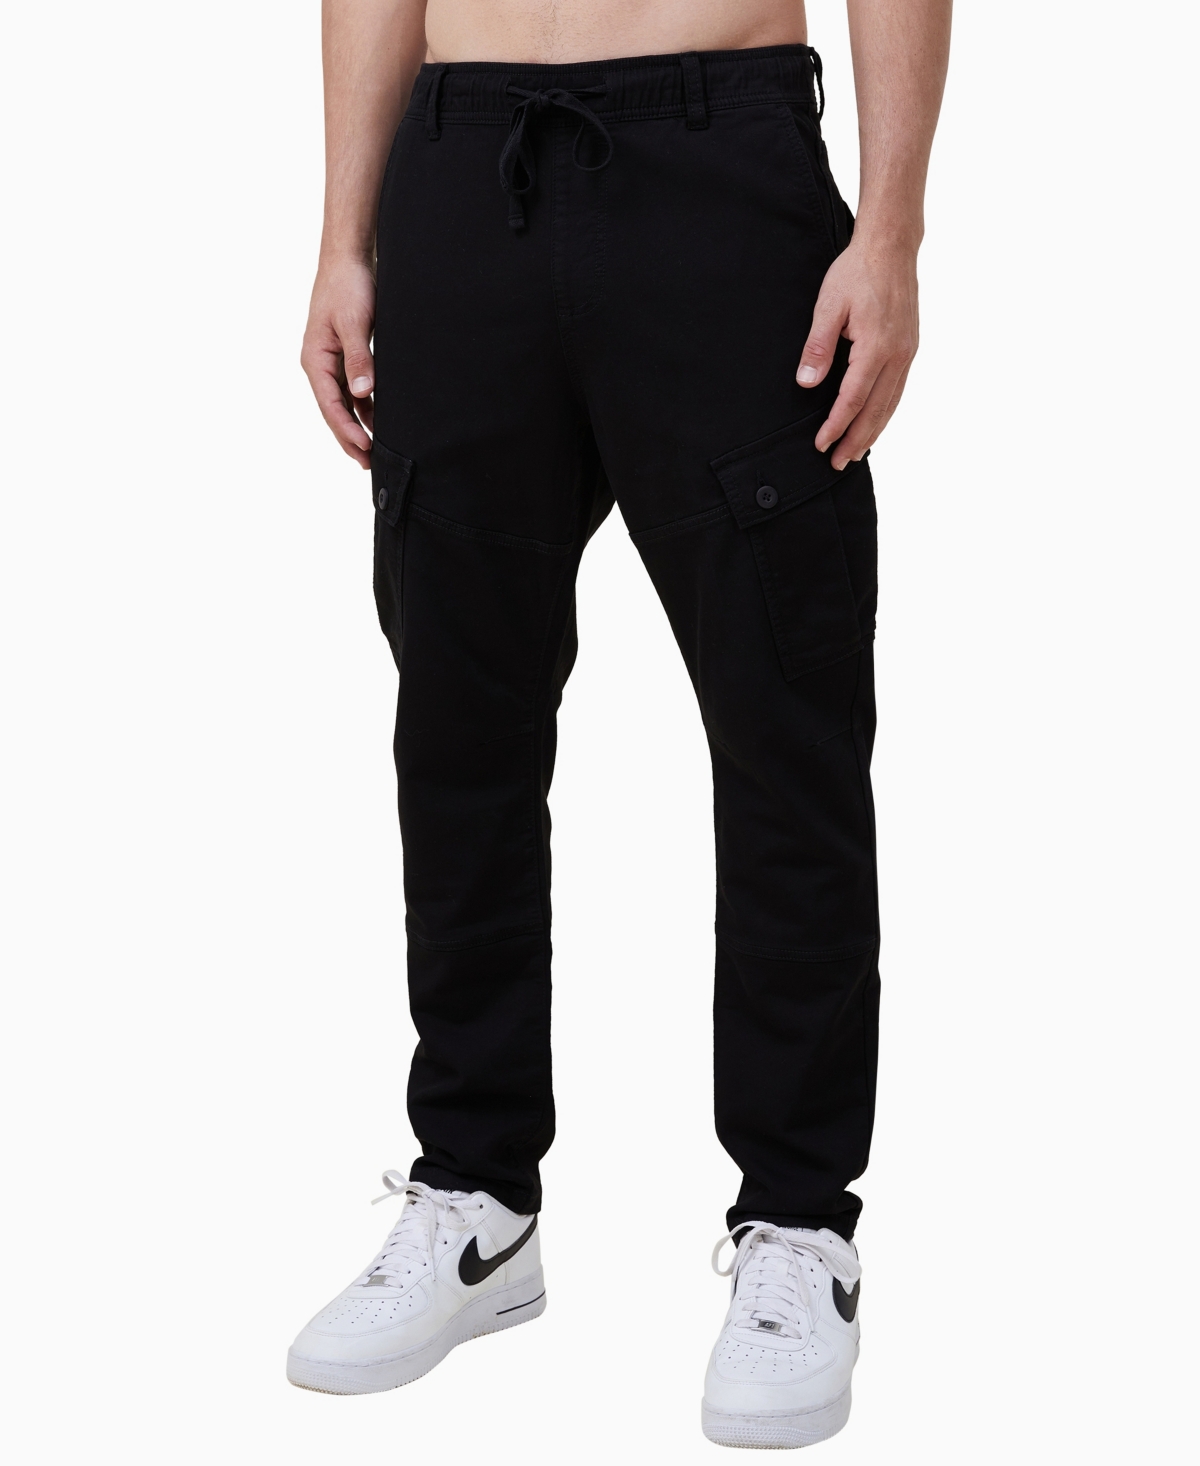 COTTON ON MEN'S MILITARY- INSPIRED CARGO PANTS